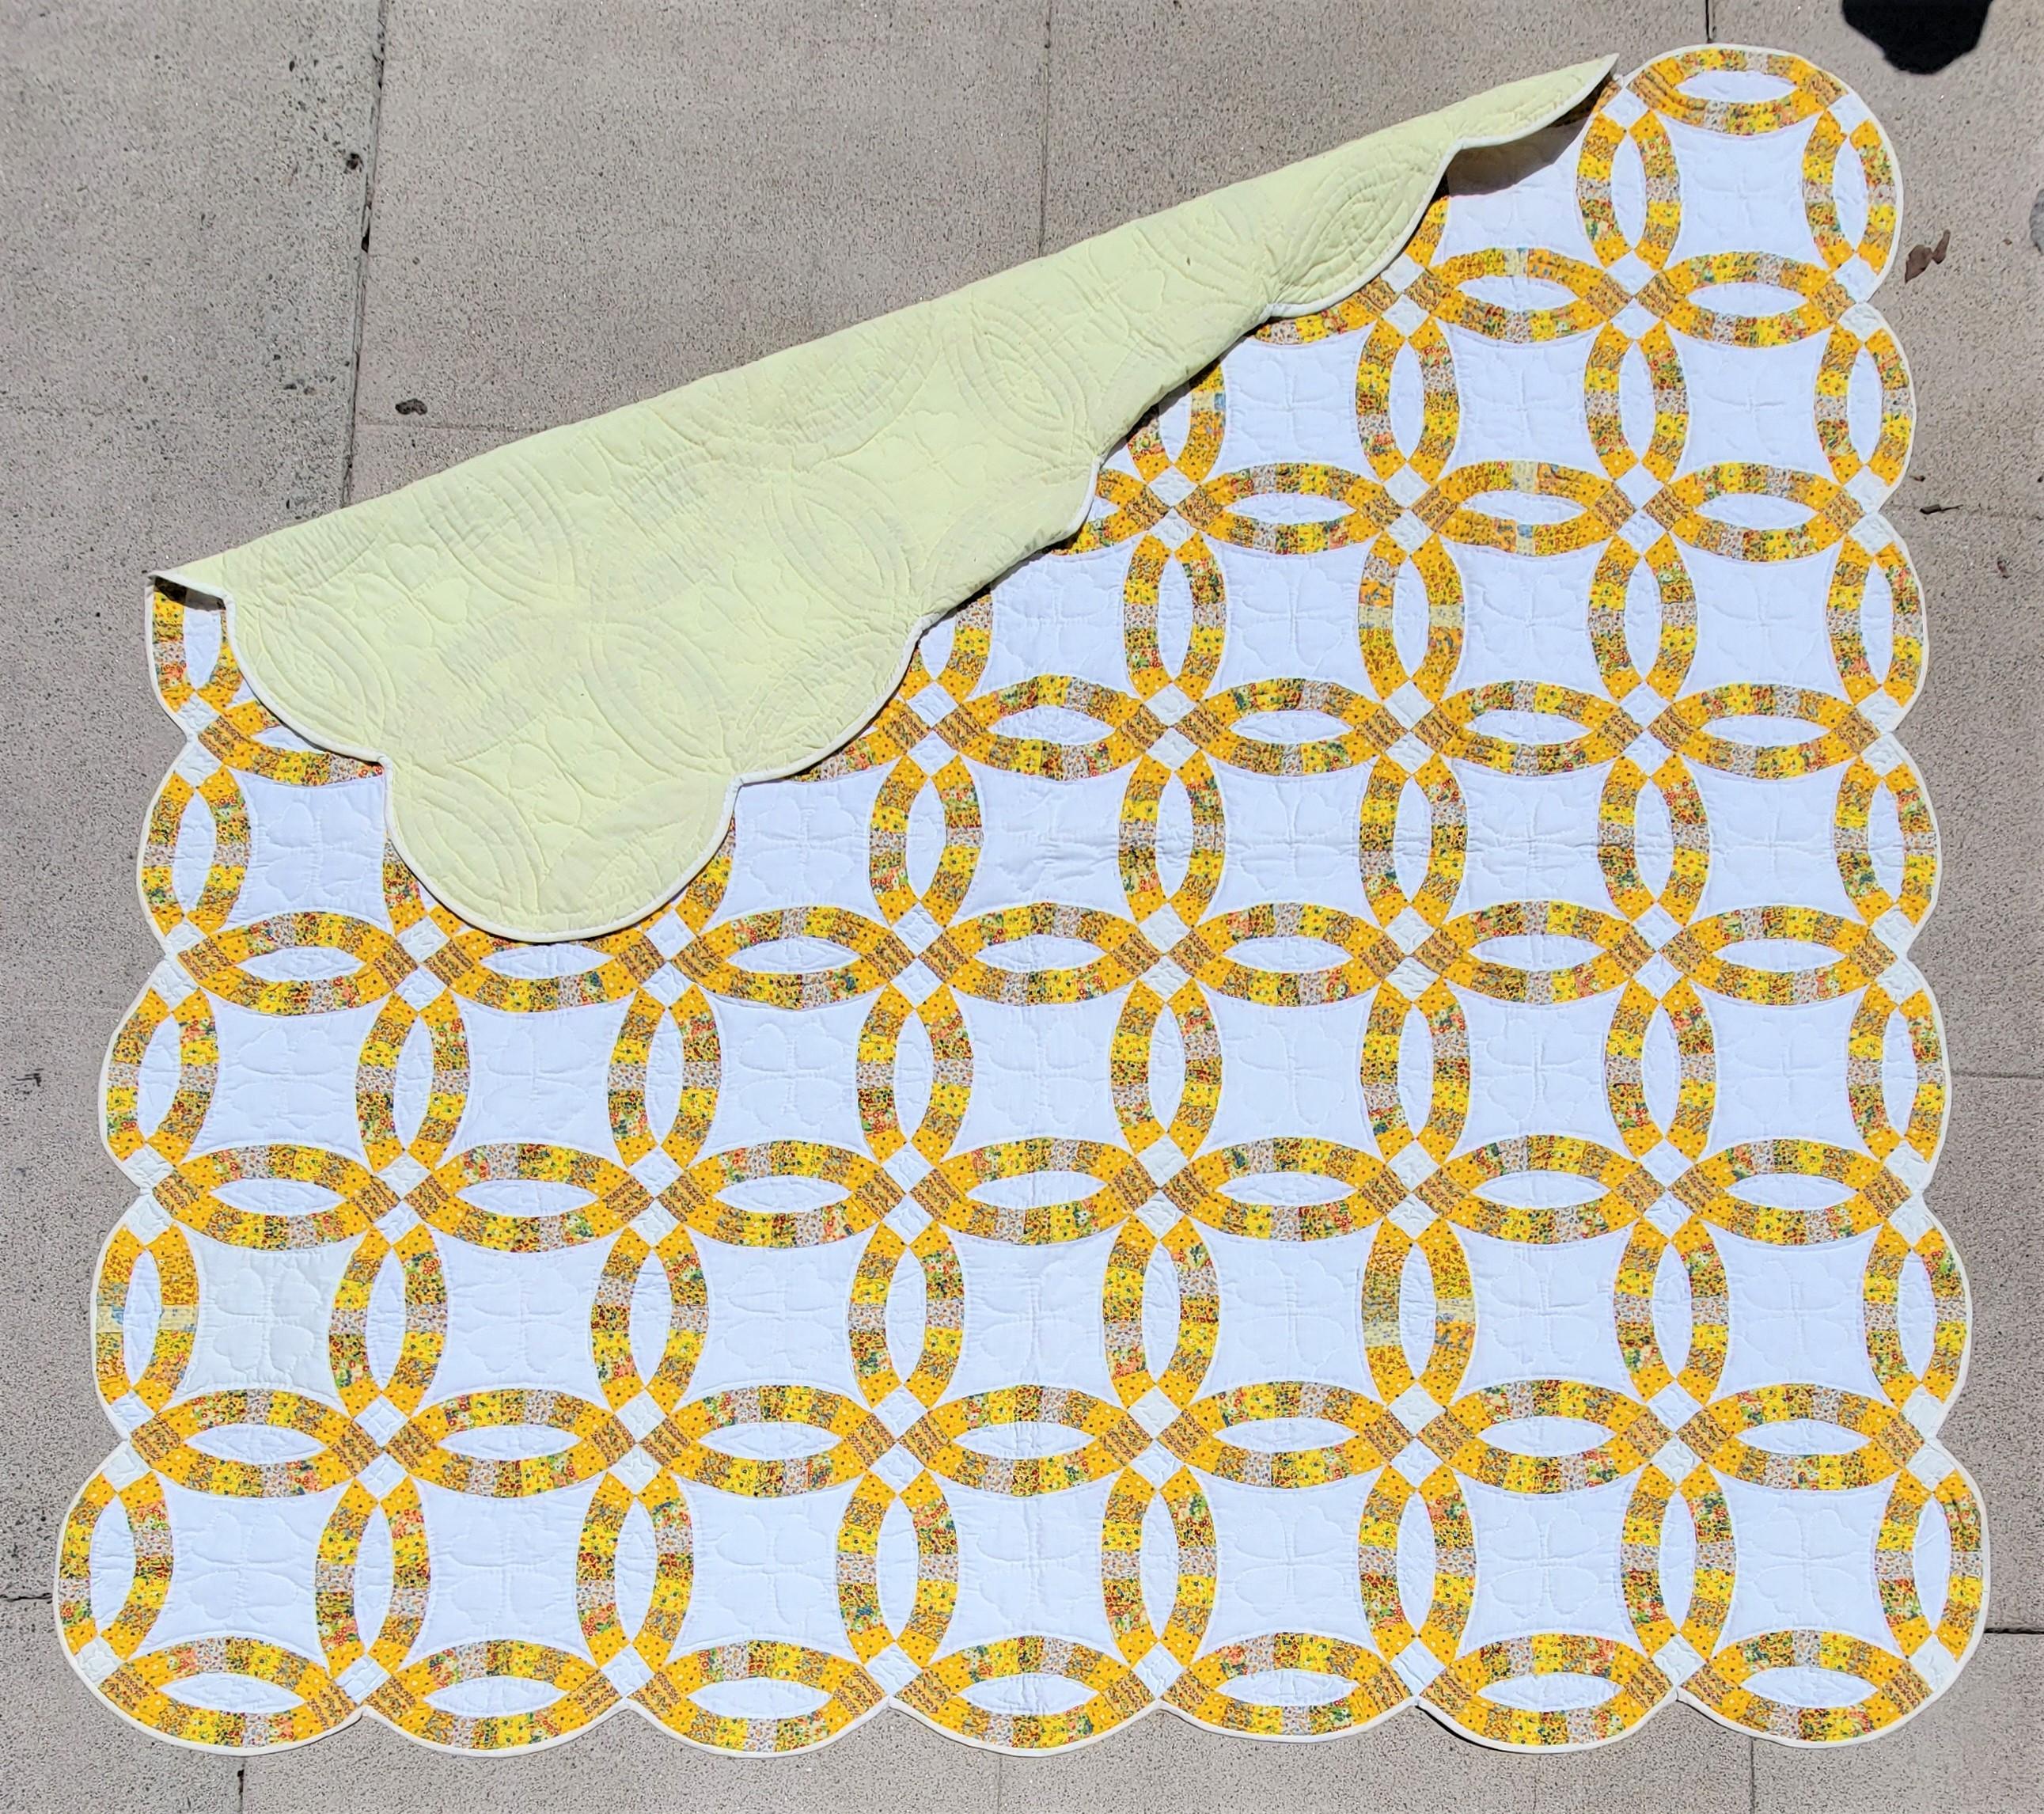 This fine 20thc yellow & white double wedding ring quilt has a Dutchy Pennsylvania calico fabric.The quilting is very good and piecework too. This is a later quilt and very big.It will fit a queen or king bed and has a scalloped border.